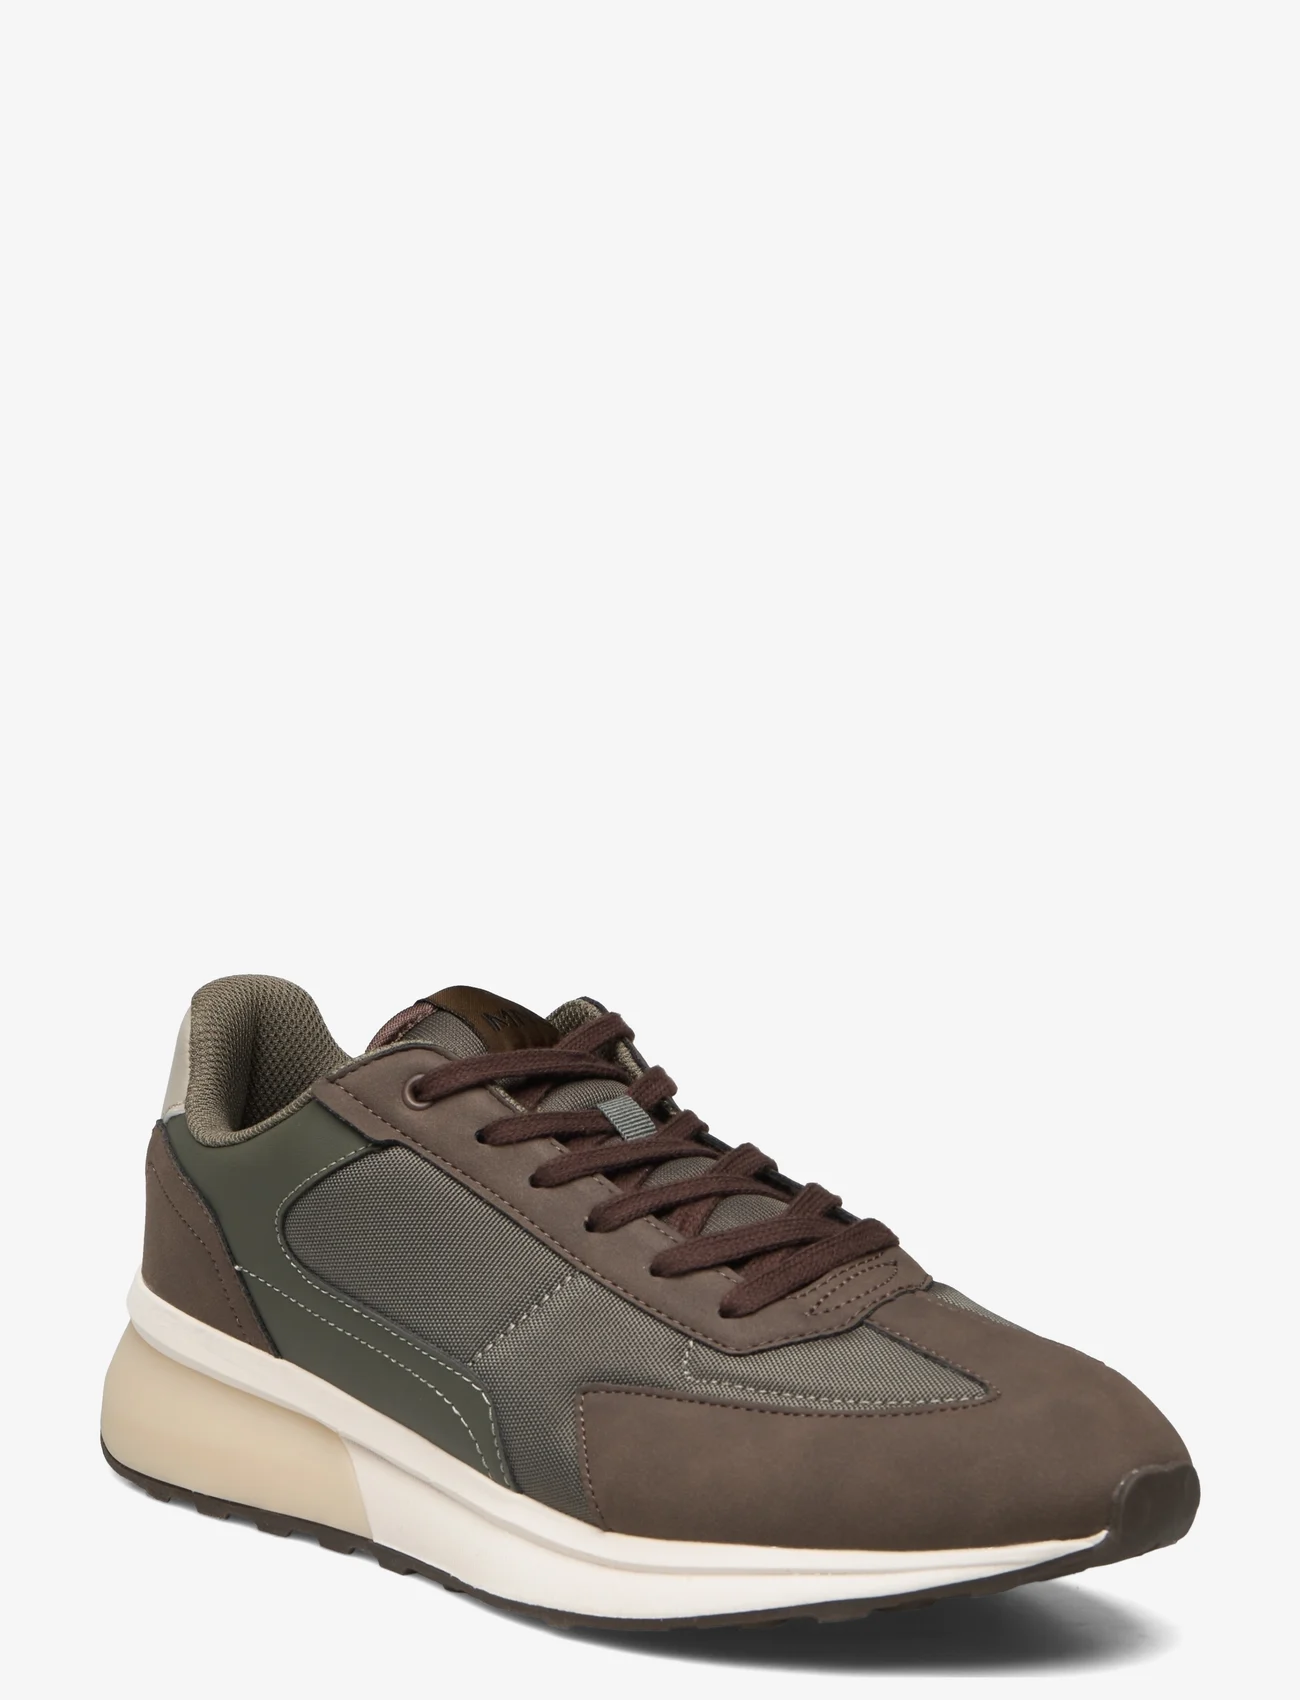 Mango - Leather mixed sneakers - lave sneakers - beige - khaki - 0